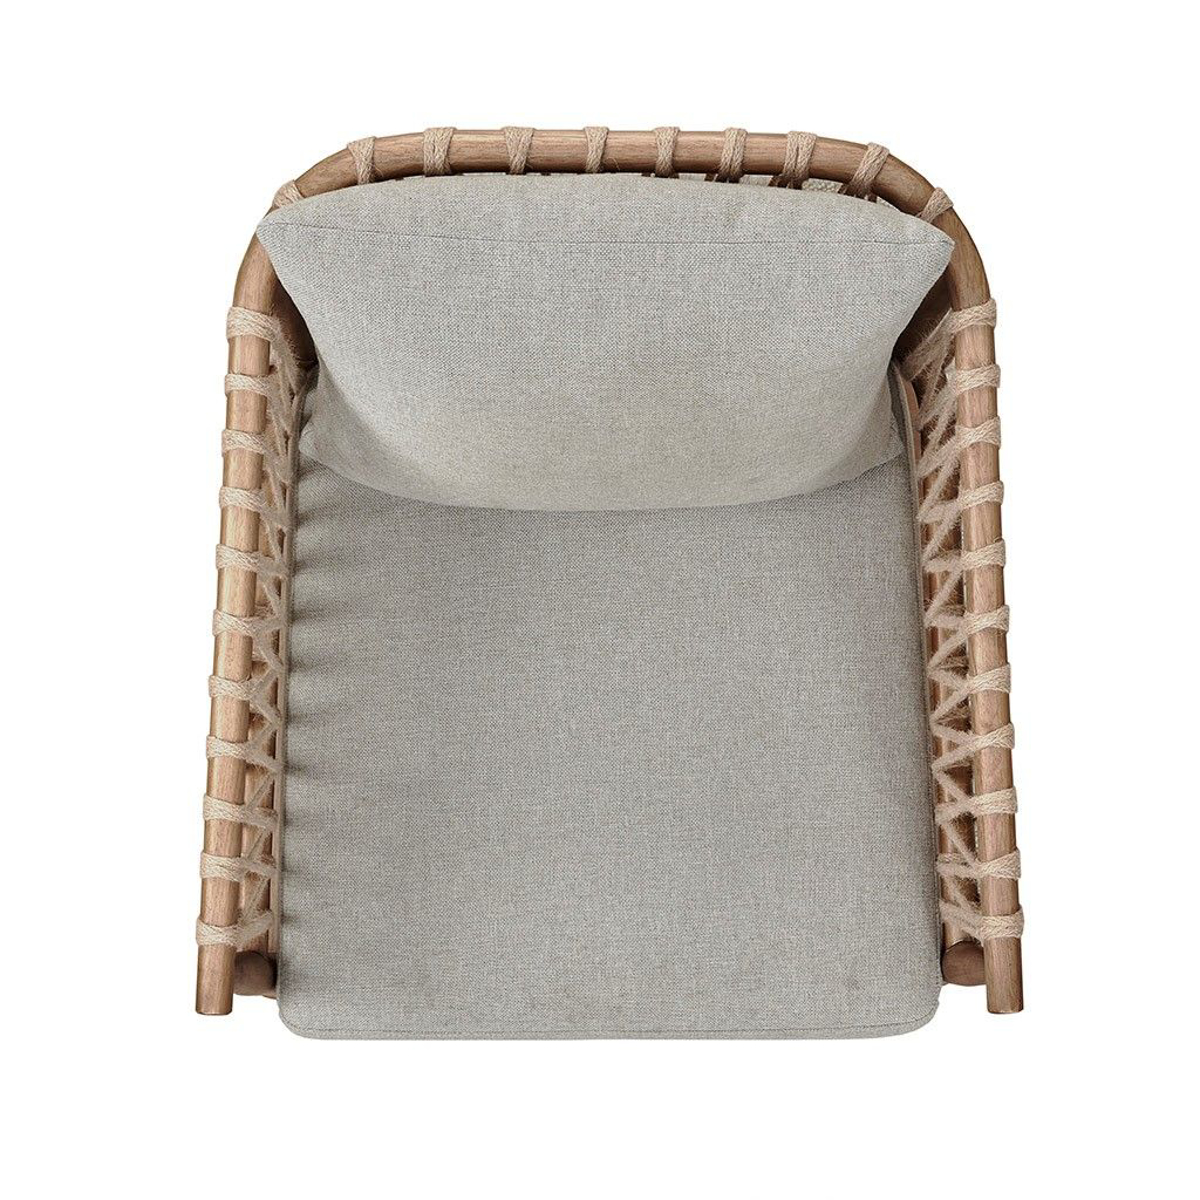 Picture of ODEZA ROPE ACCENT CHAIR